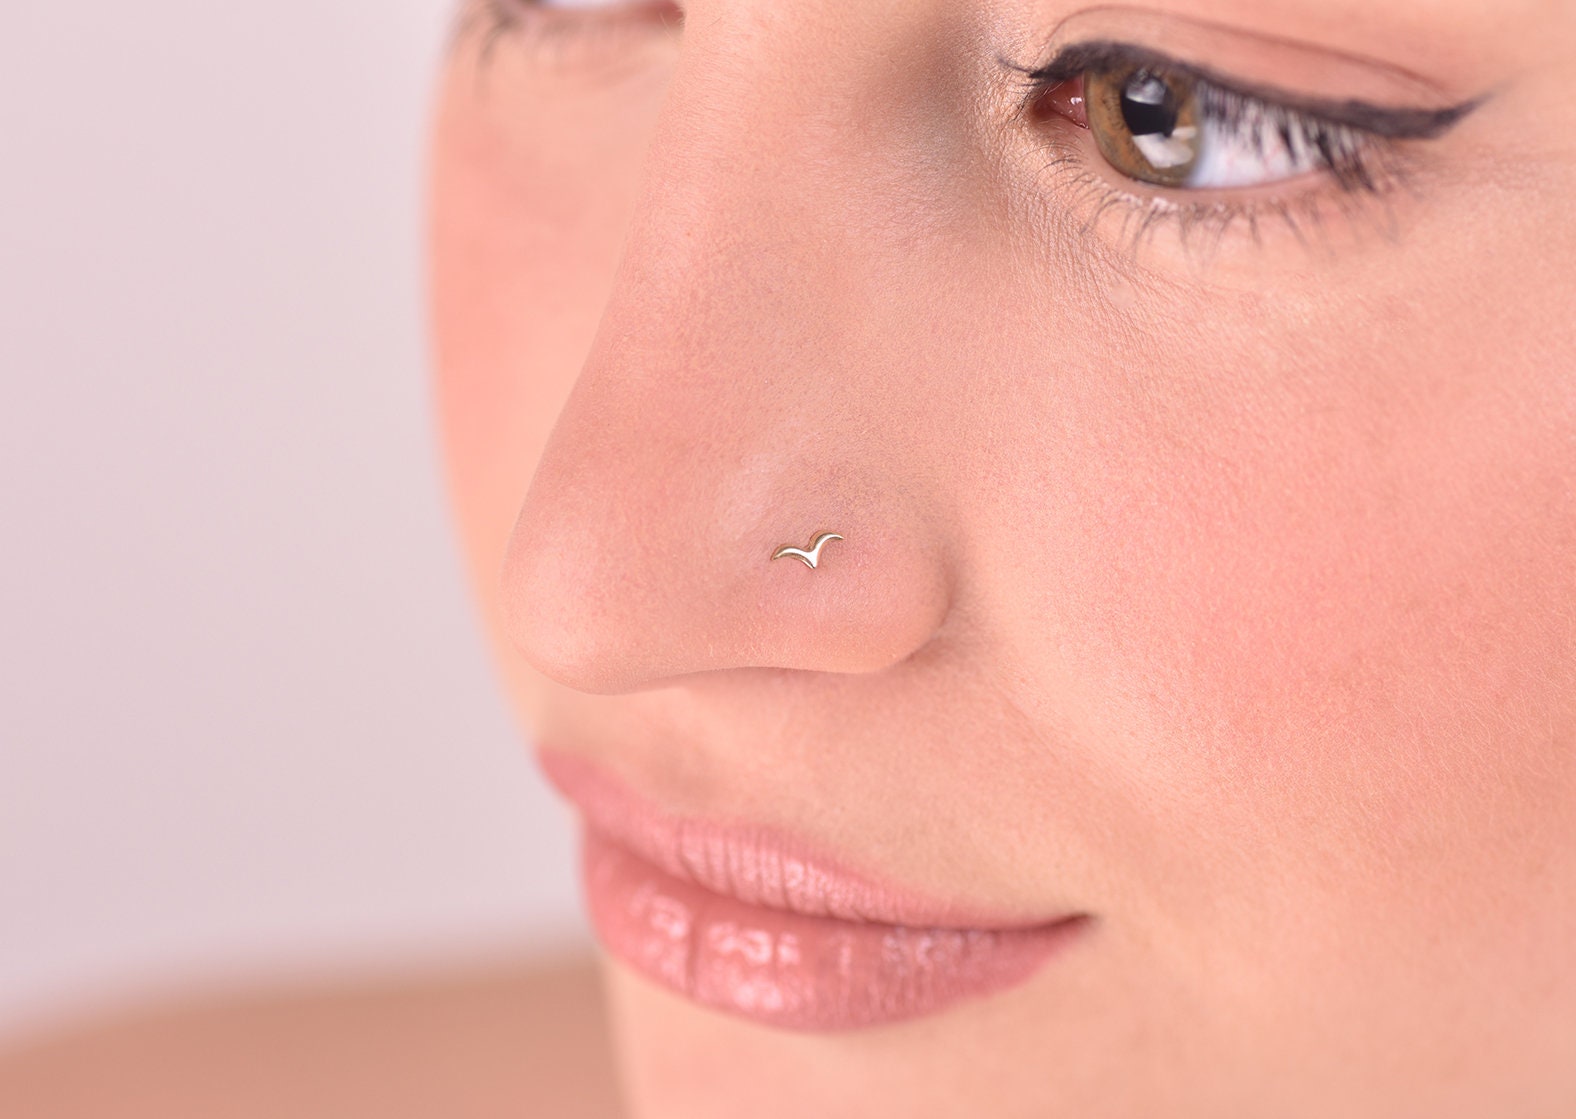 Buy Teeny Tiny 1mm CZ Sterling Silver Nose Stud, Nose Ring, Silver Nose Stud,  Sterling Nose Stud, 1mm Nose Stud, Tiny Nose Ring, Nose Stud, SN1 Online in  India - Etsy